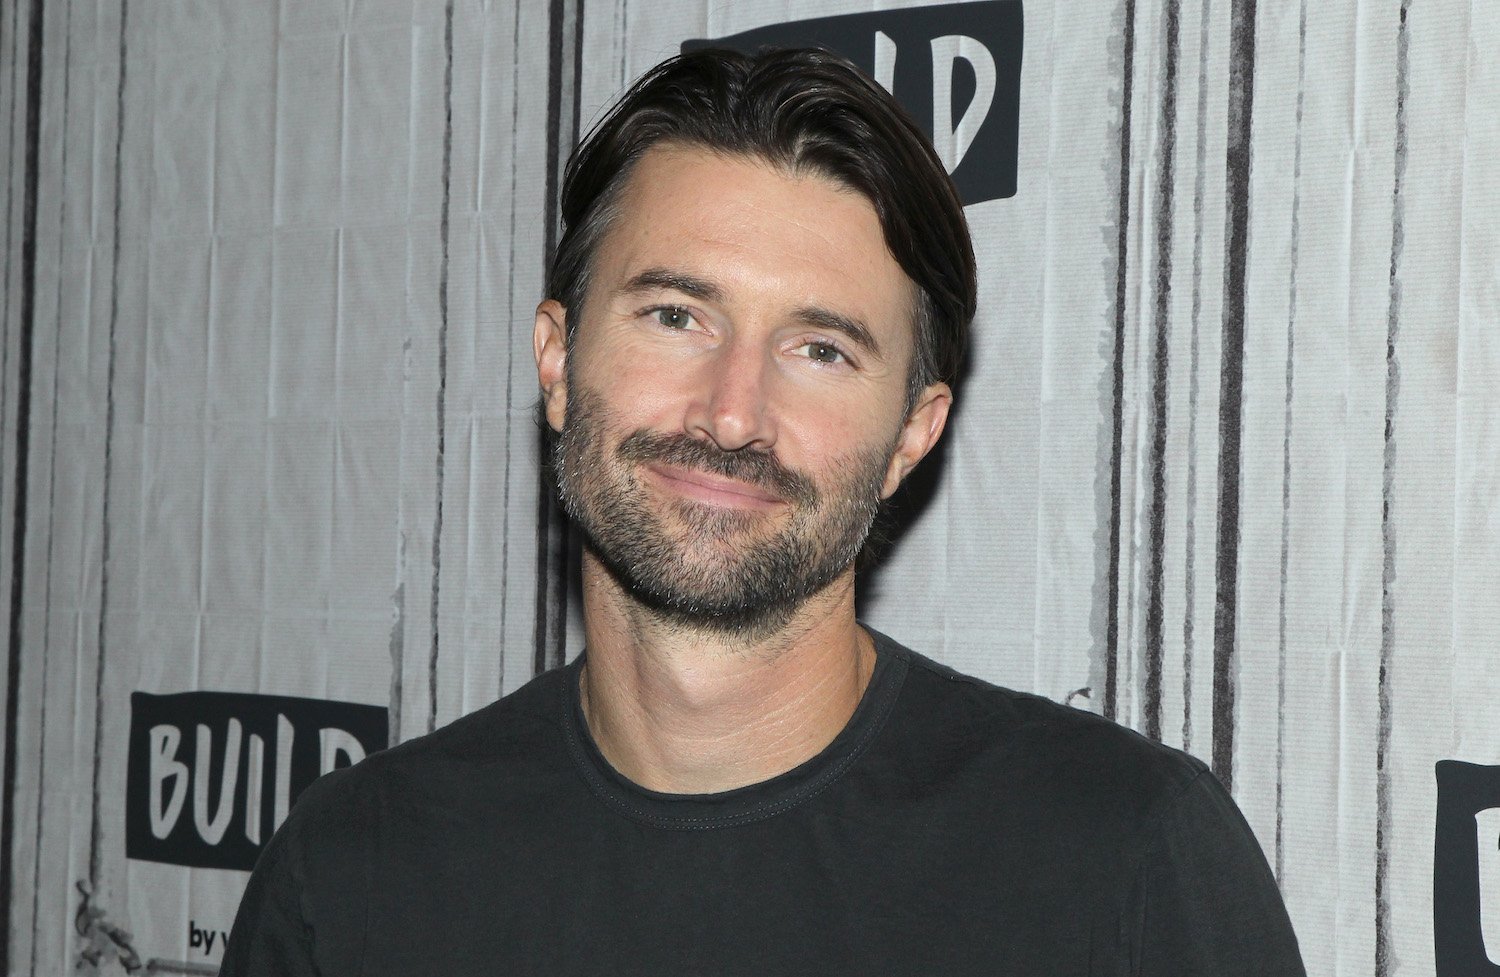 Brandon Jenner smiling at the camera in front of a white and gray background